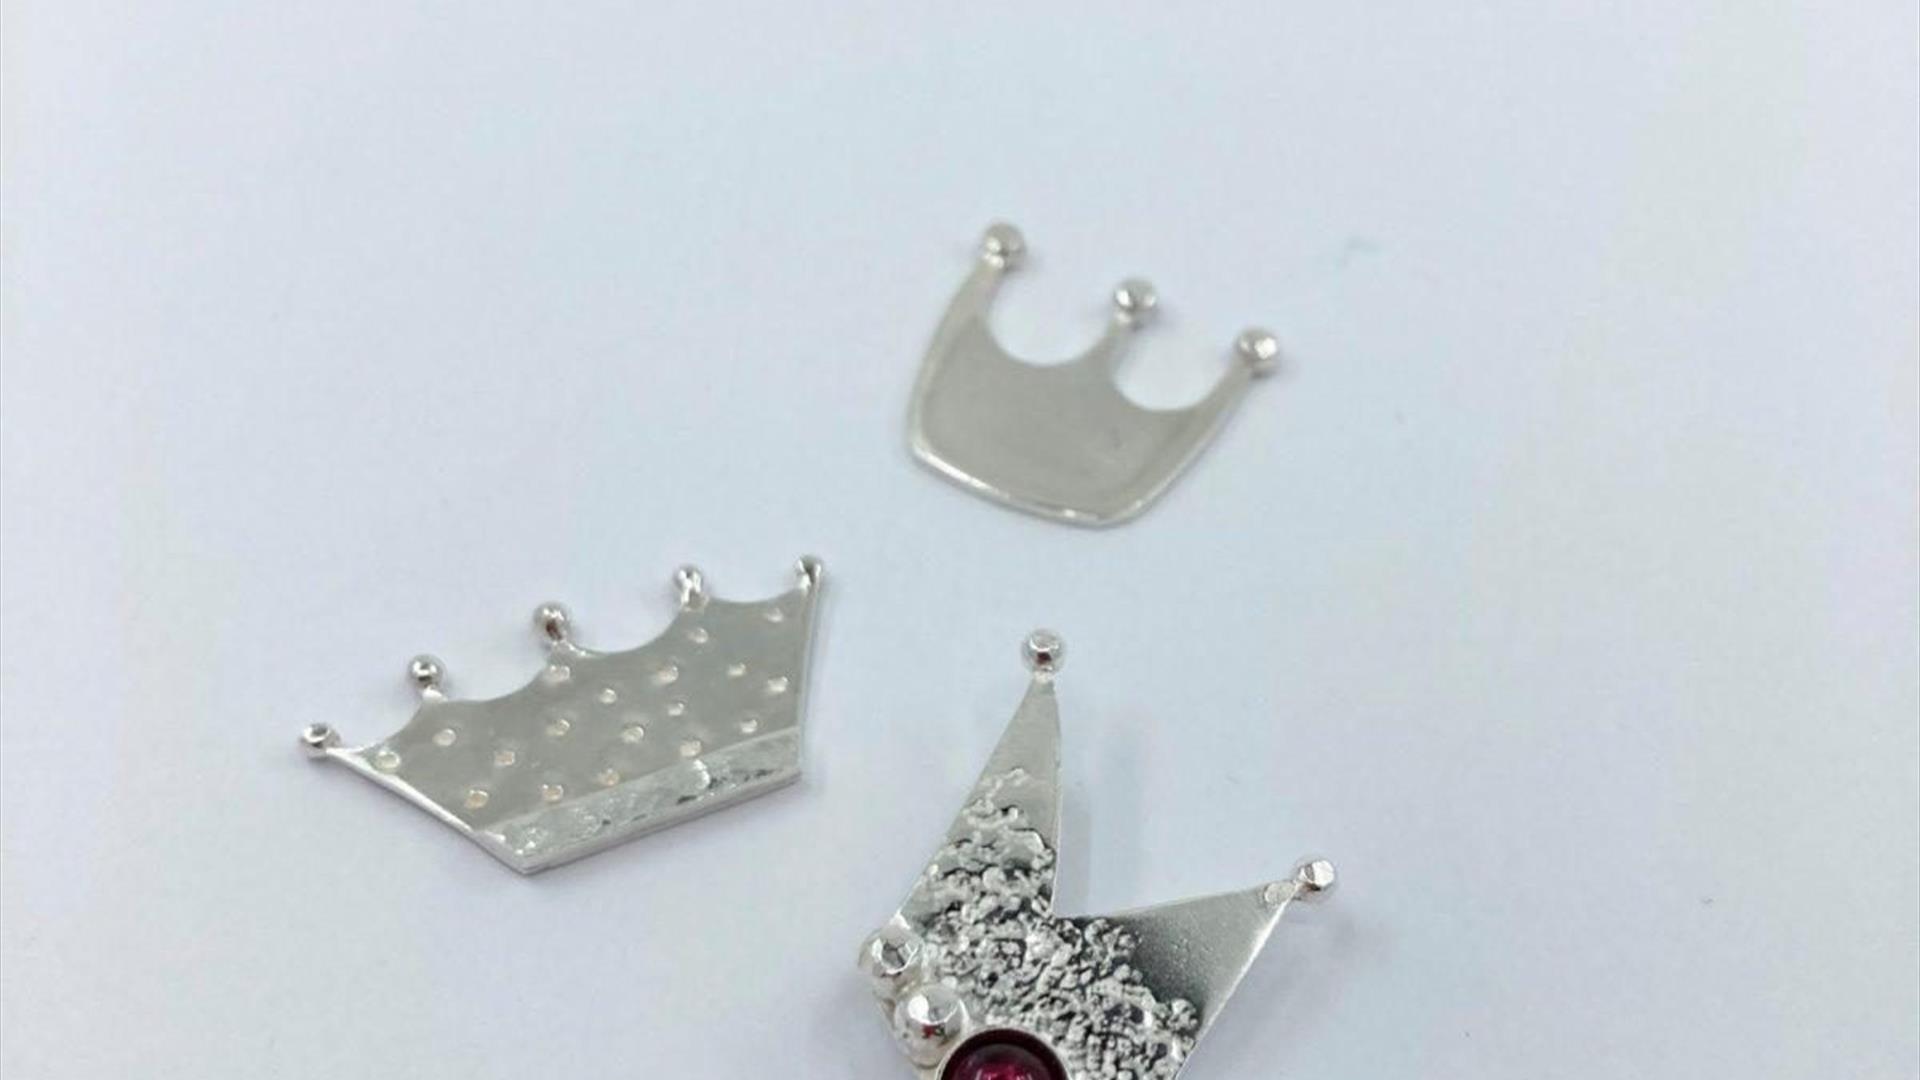 Image shows 3 crowns made from silver,  they vary in size and the largest one has a red jewel in the middle.